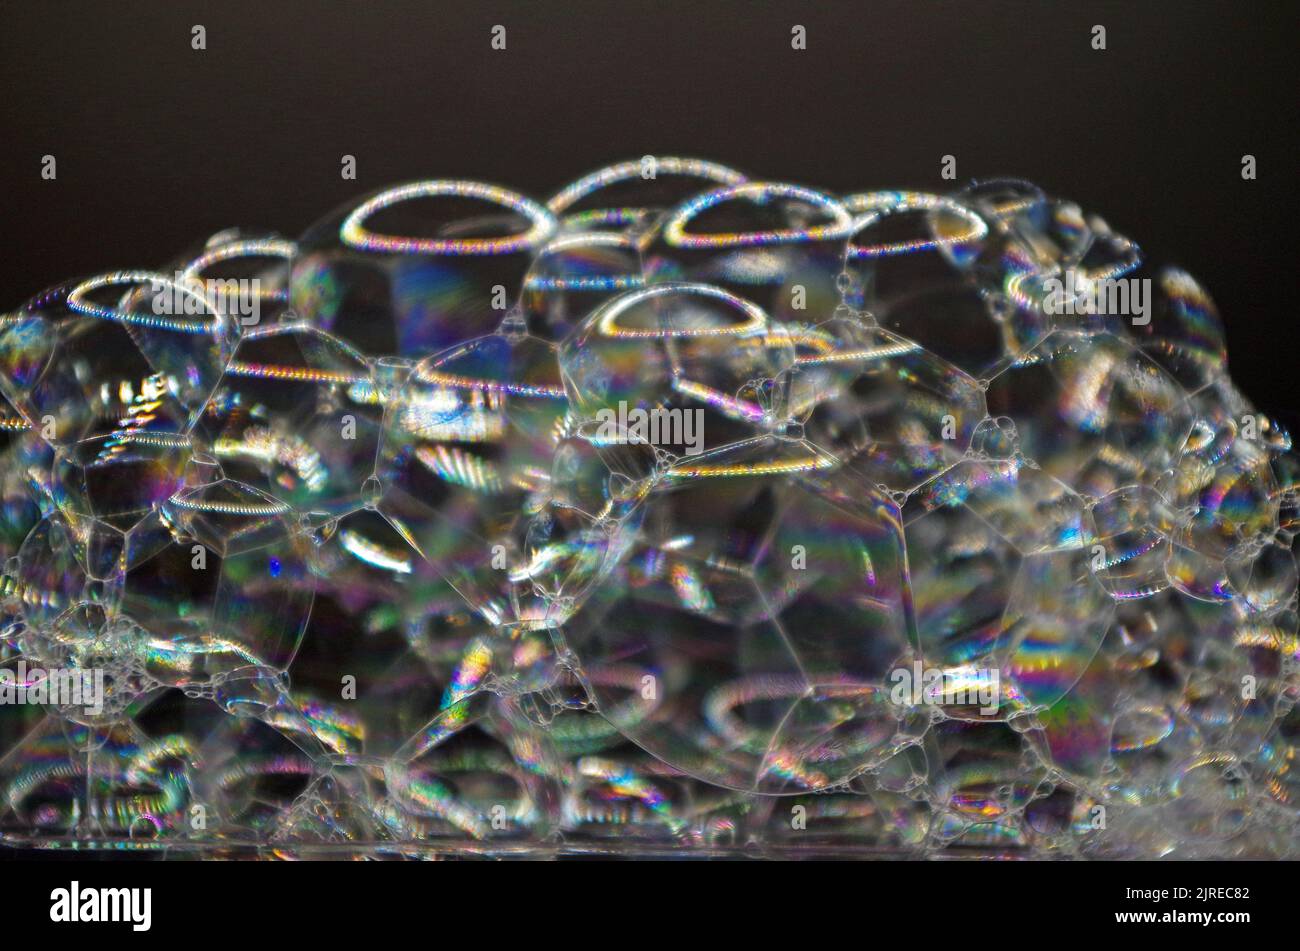 Soap Bubbles in differnet fiews. Stock Photo